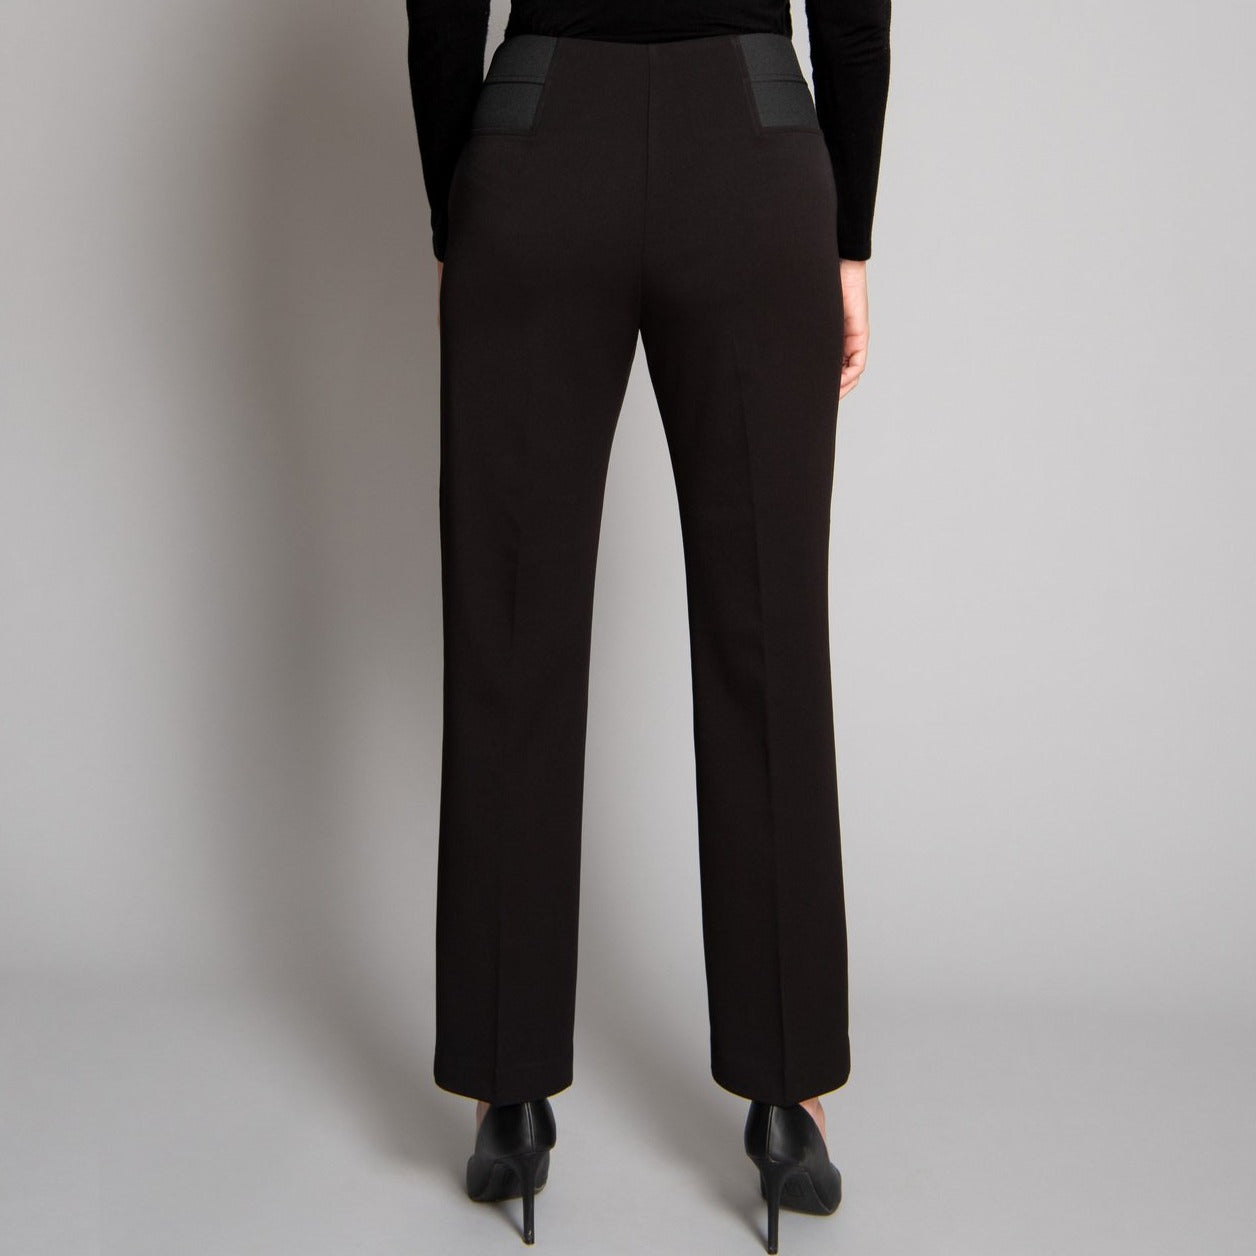 Lining Womens Formal Trouser Pants in Mangalore - Dealers, Manufacturers &  Suppliers - Justdial